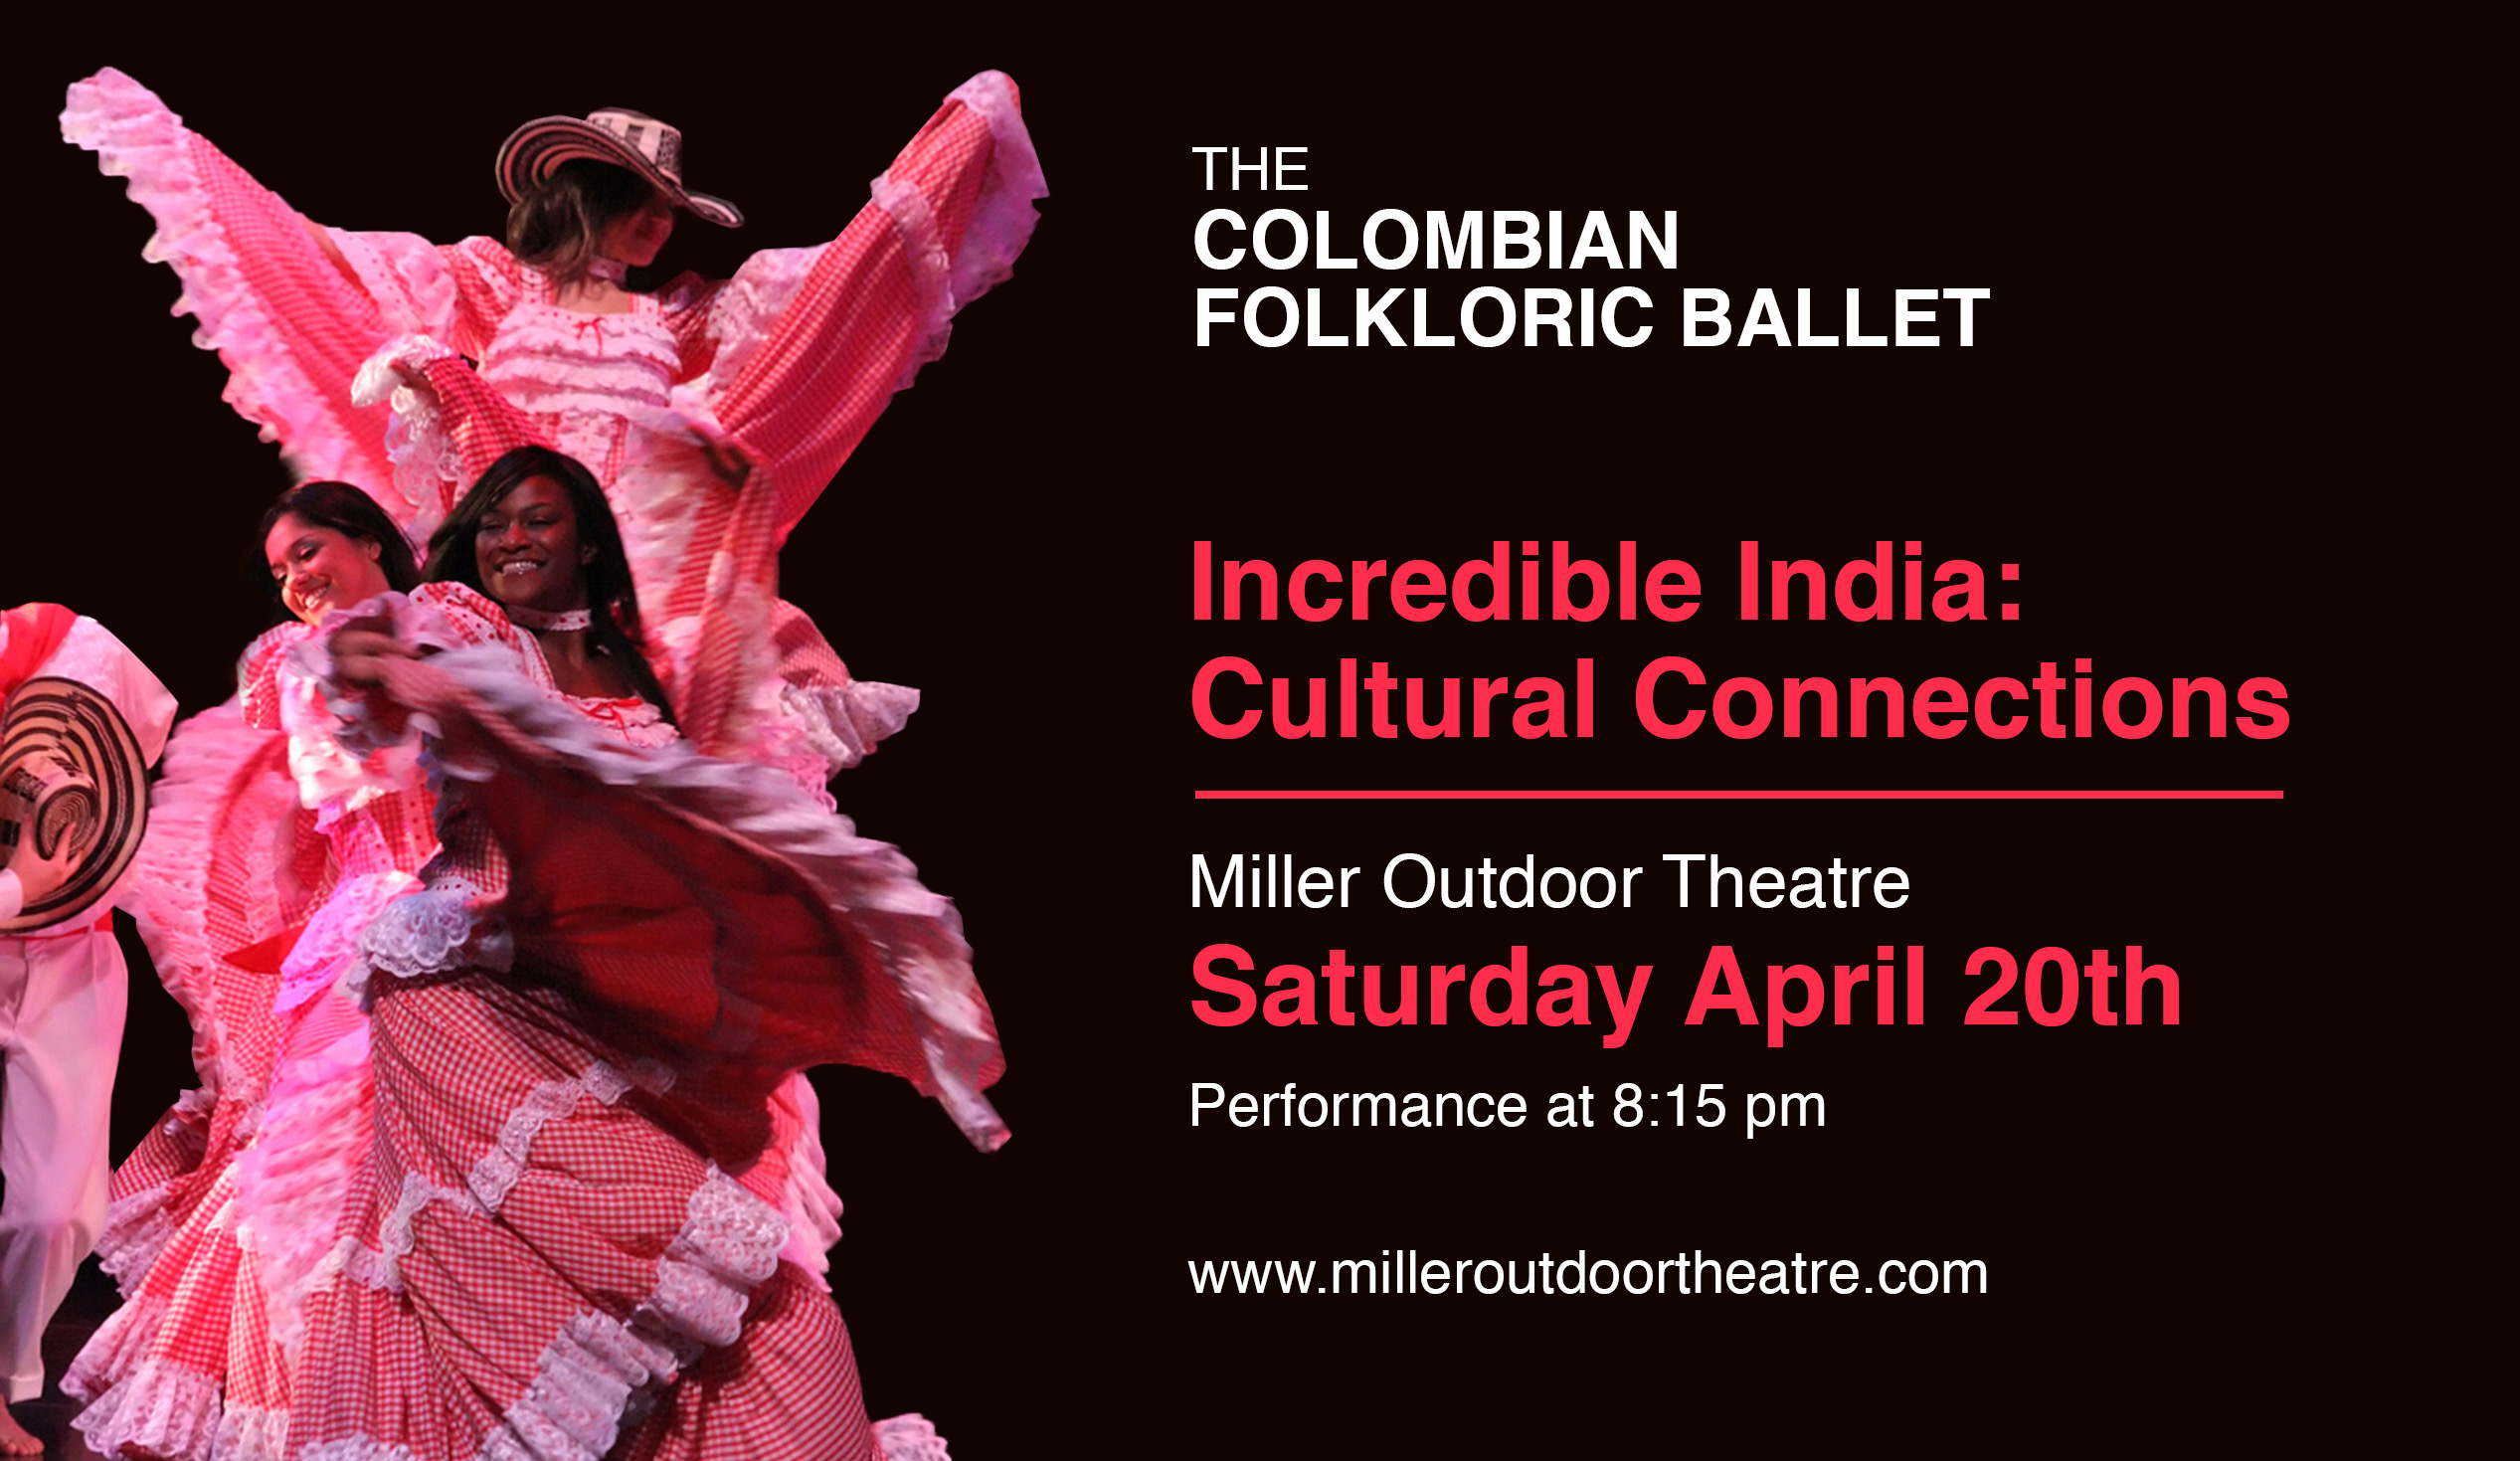 The Colombian Folkloric Ballet. 2019 Miller Theatre Incredible India Cultural Connectioncca
